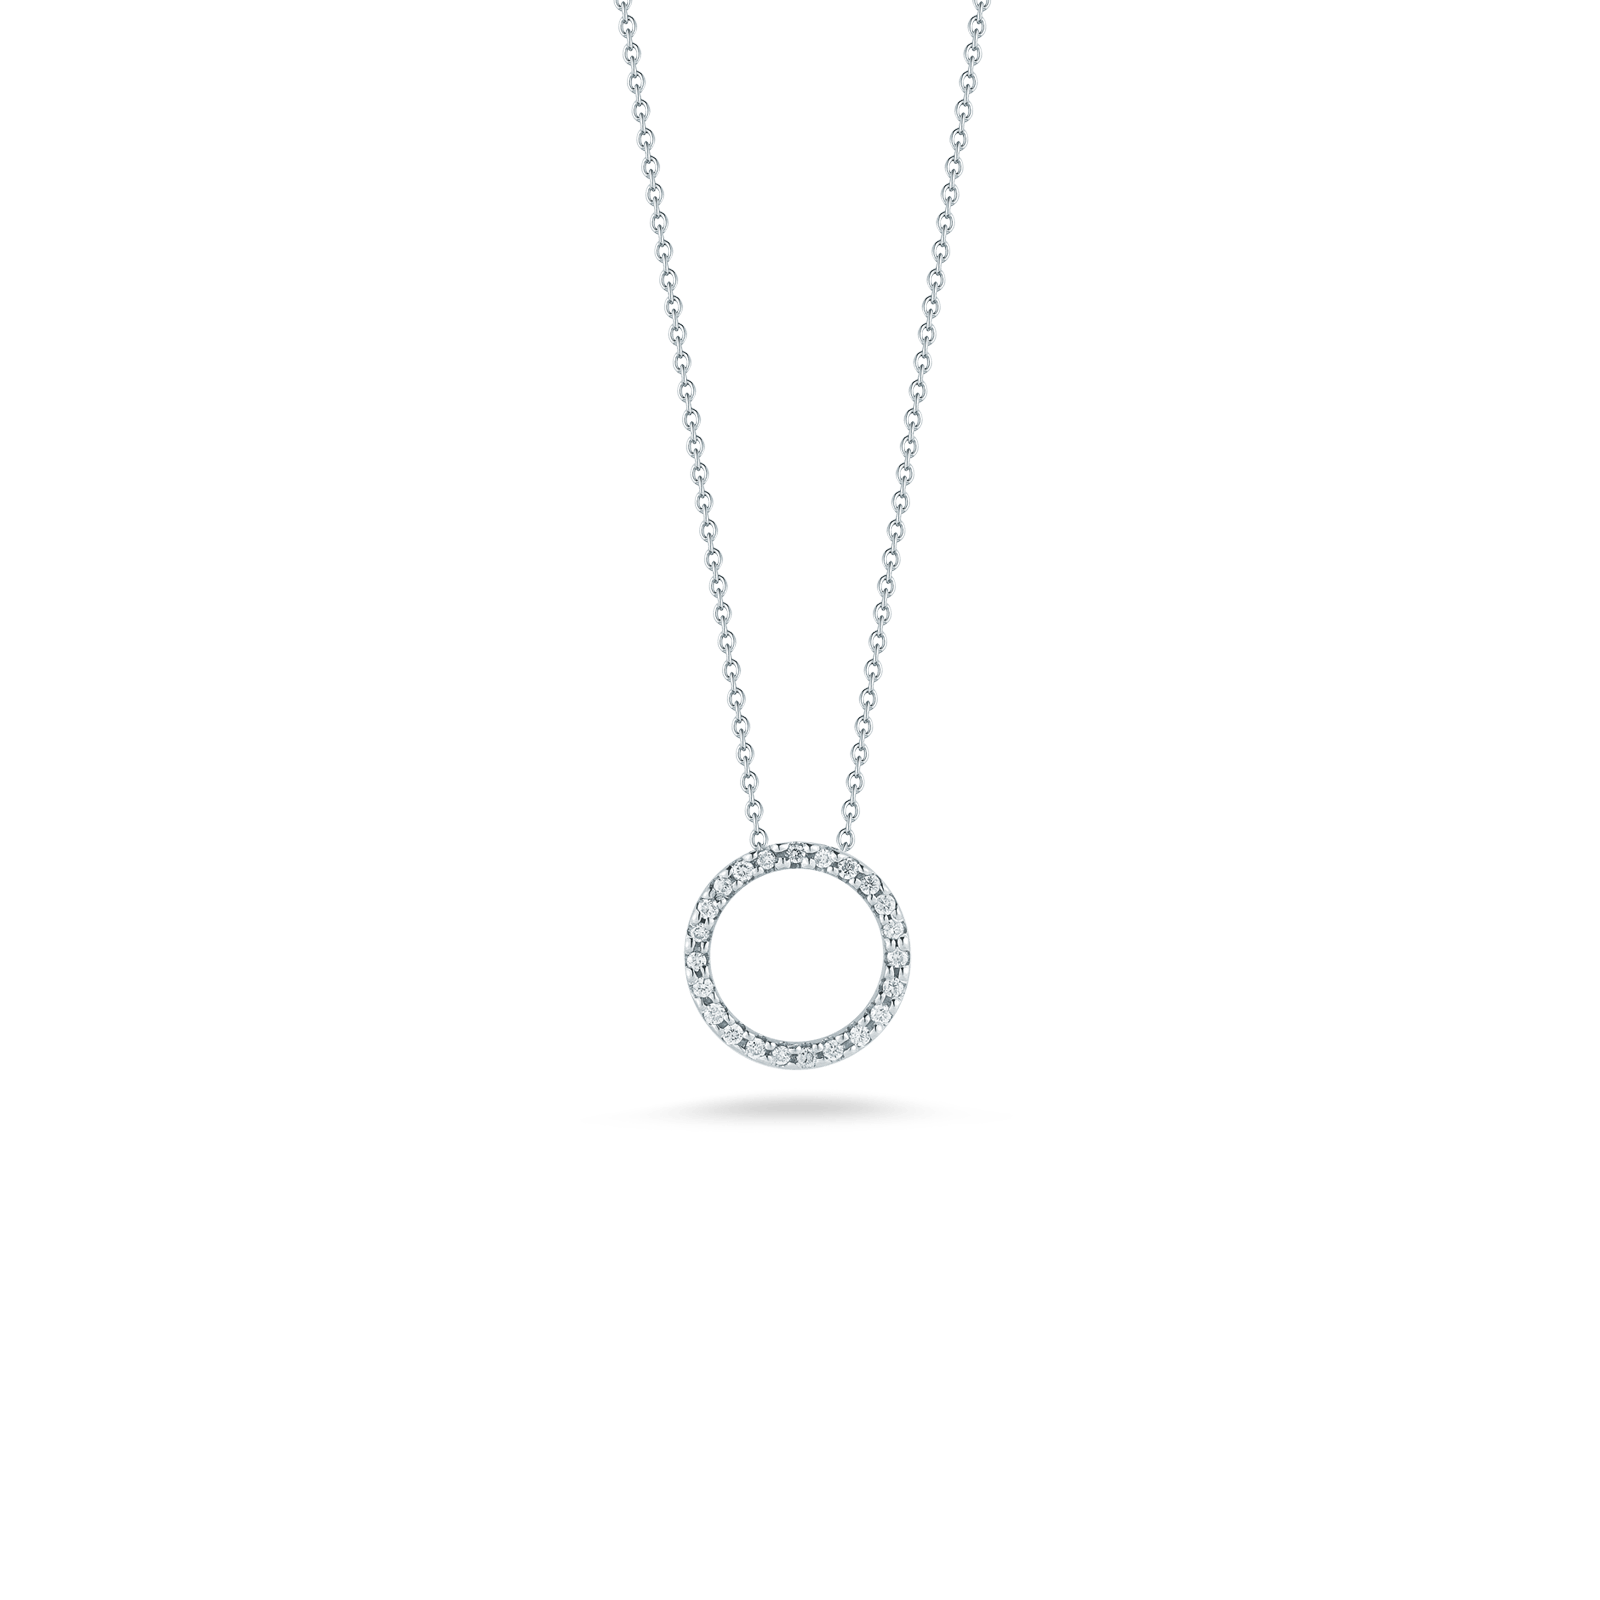 Men's 5.7mm Curb Chain Necklace in Hollow 14K White Gold - 22